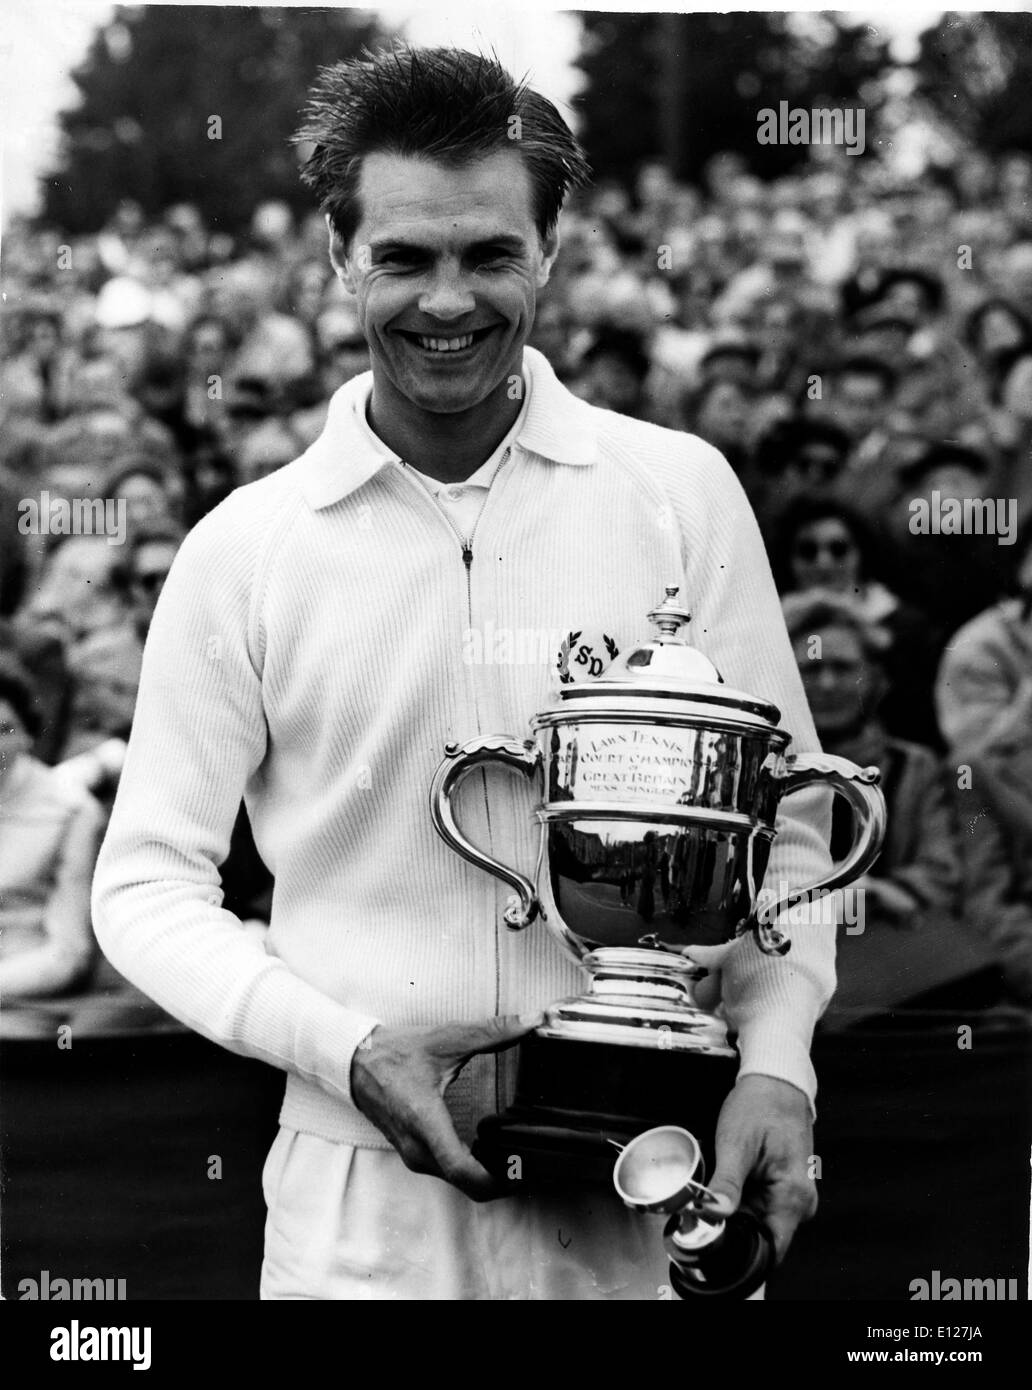 Apr 01, 2009 - London, England, United Kingdom - SVEN DAVIDSON (13 July 1928 Ð 28 May 2008) was a Swedish tennis player. In 1957, he was the first Swede to win the French championships (which became the French Open) with a victory over Herbie Flam in the finals. In 1955, he was runner-up to Tony Trabert, and in the 1956 tournament he lost to Lew Hoad. He won a total of 26 Swedish championships and played 86 matches for the Davis Cup-team. (Credit Image: KEYSTONE Pictures USA/ZUMAPRESS.com) Stock Photo